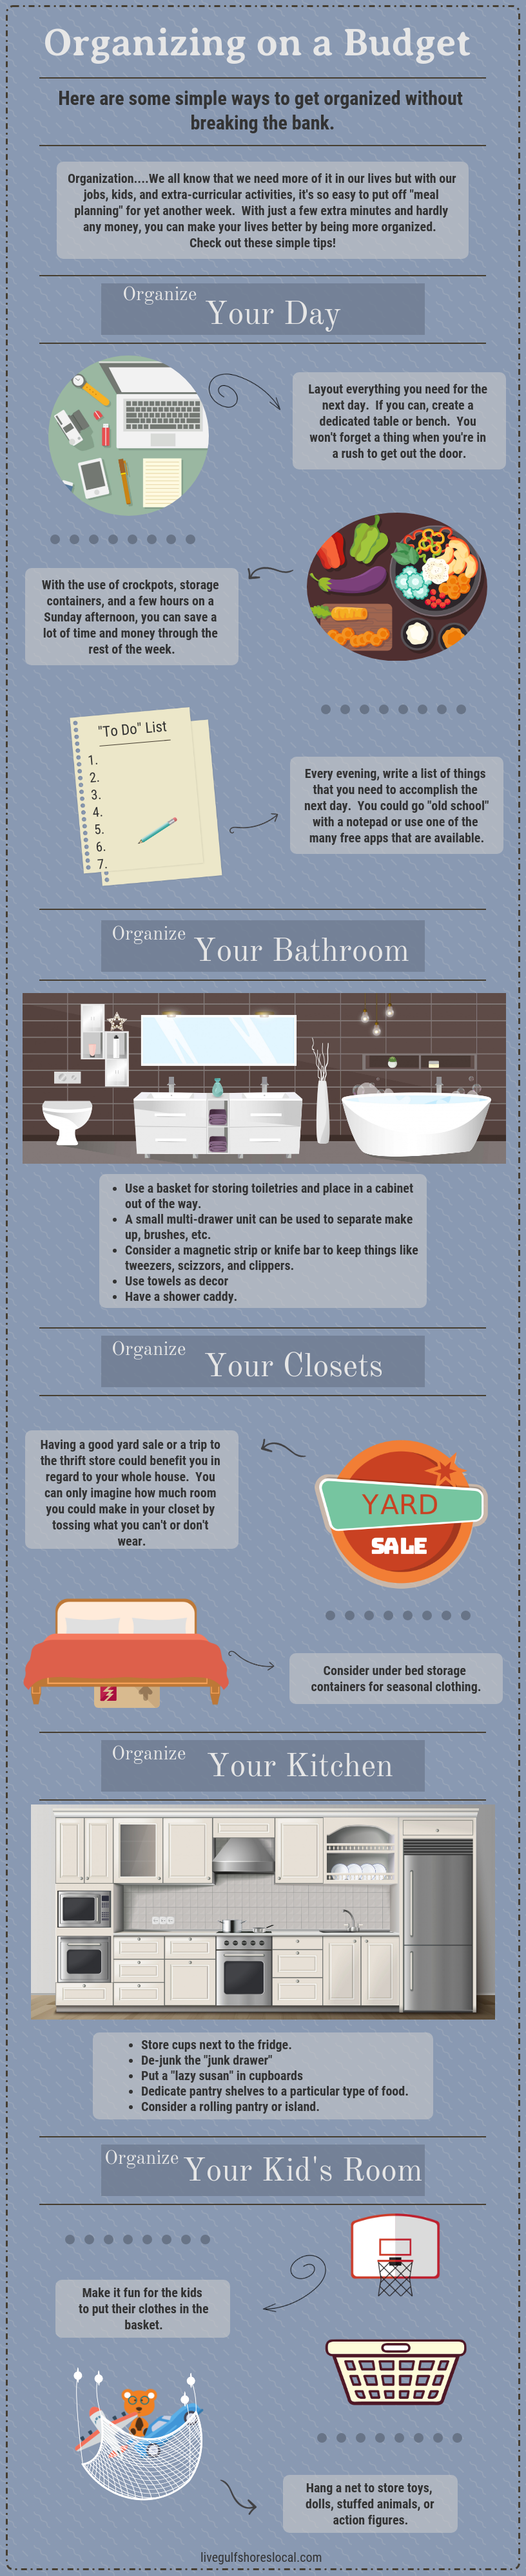 Infographic - Organizing Your Home on a Budget